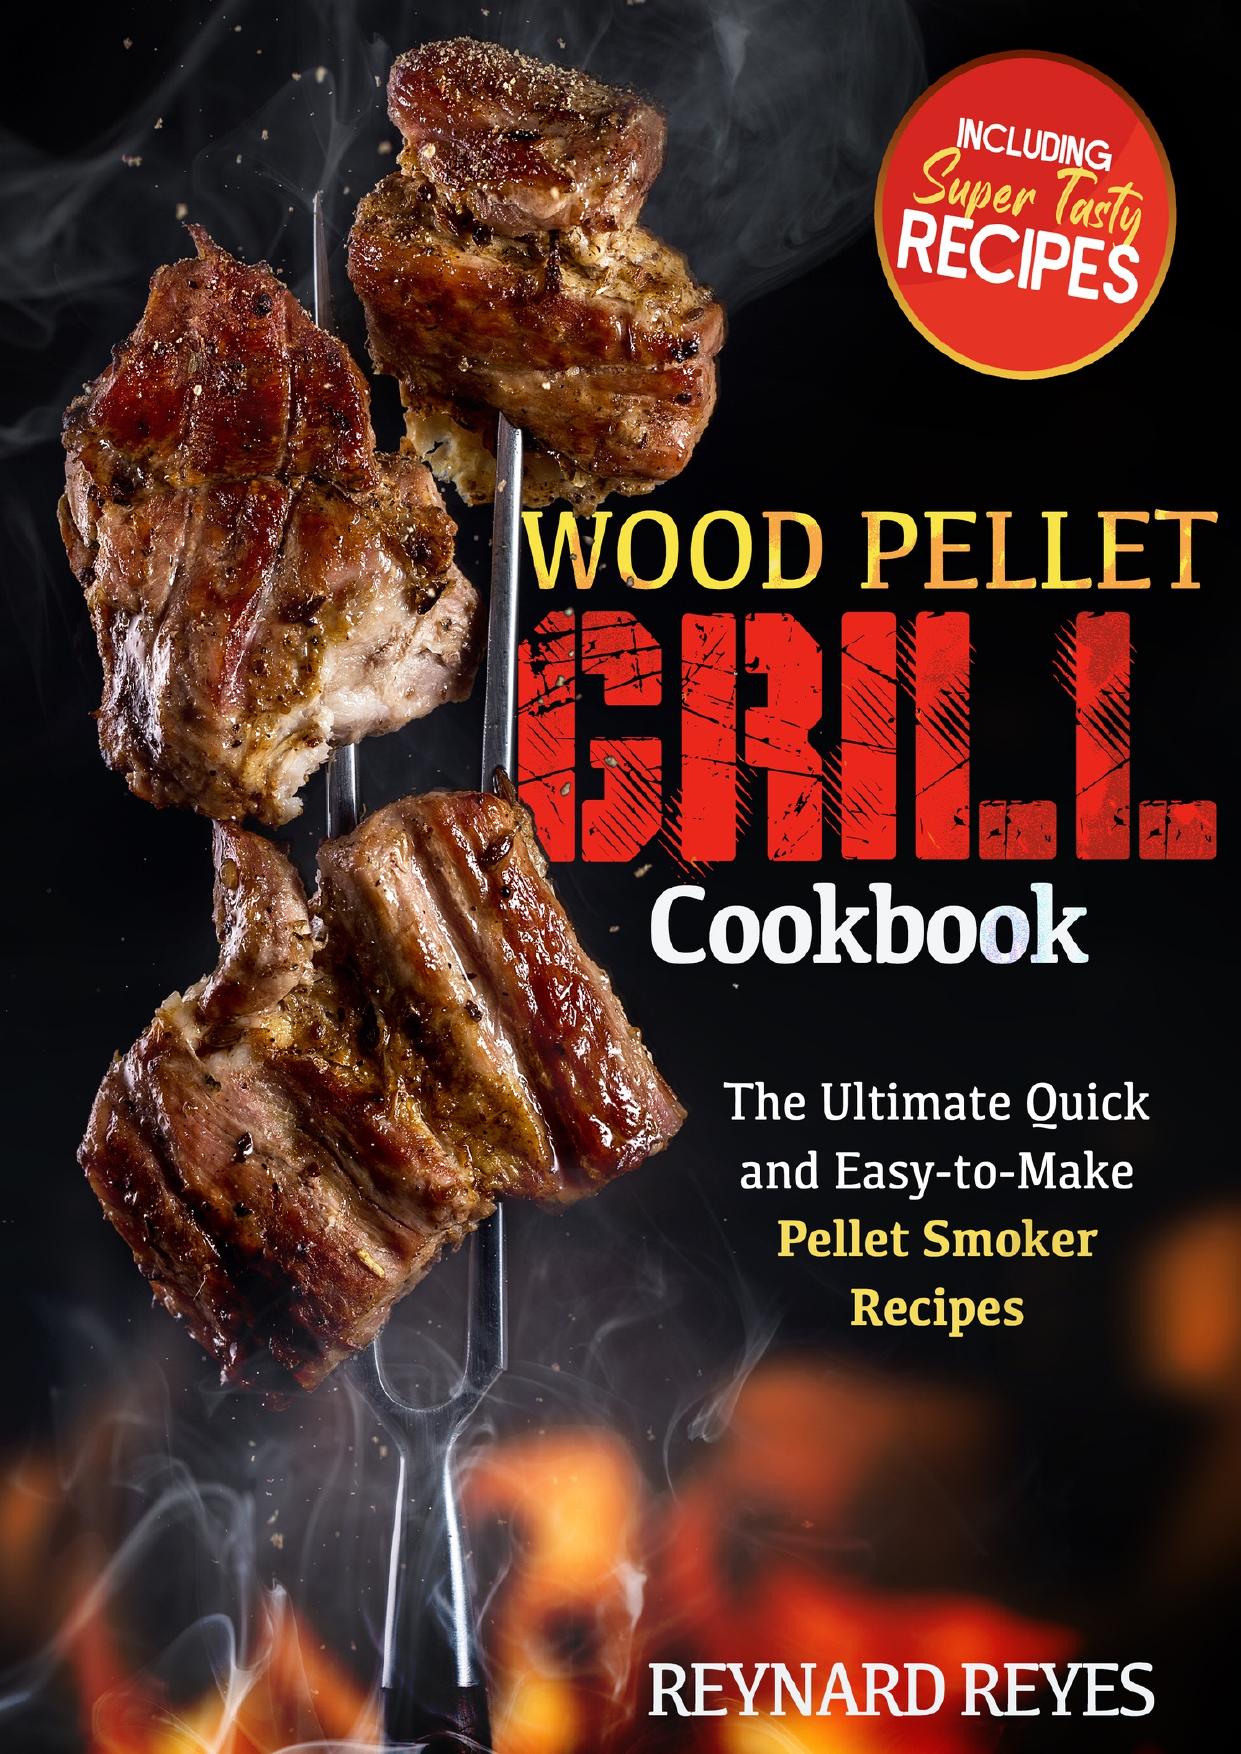 Wood Pellet Grill Cookbook: The Ultimate Quick and Easy-to-Make Pellet Smoker Recipes by Reyes Reynard